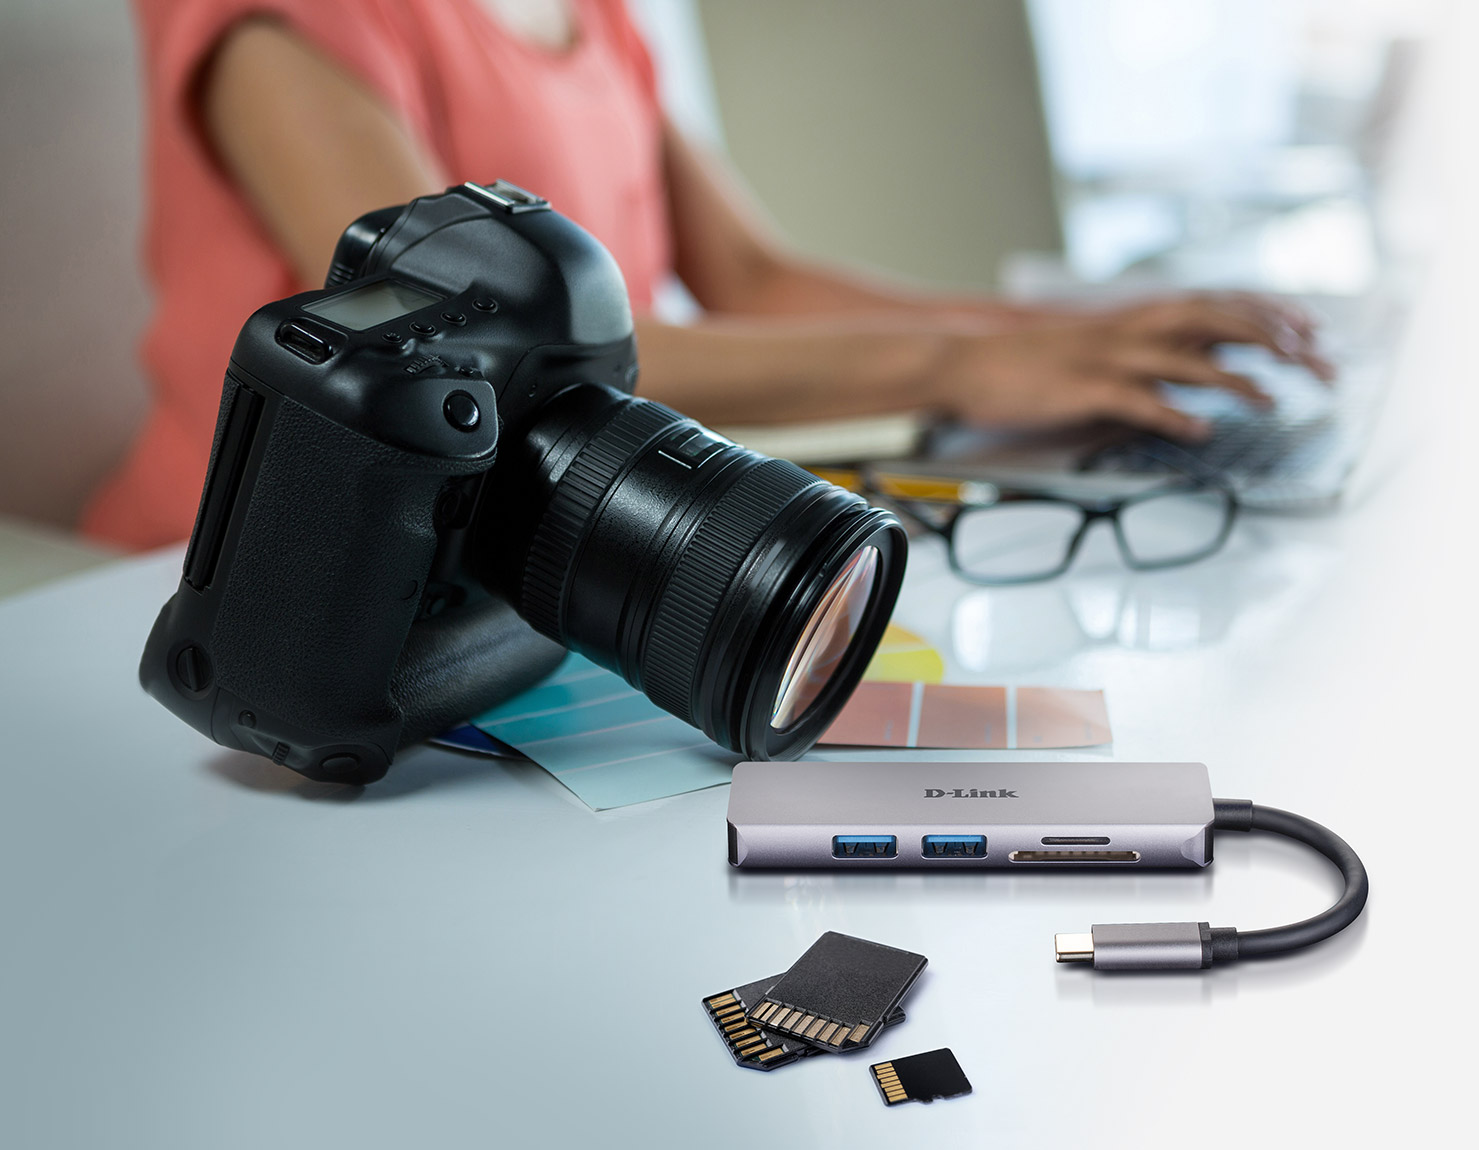 DUB-M530 5-in-1 USB-C Hub with HDMI/Card Reader next to a camera